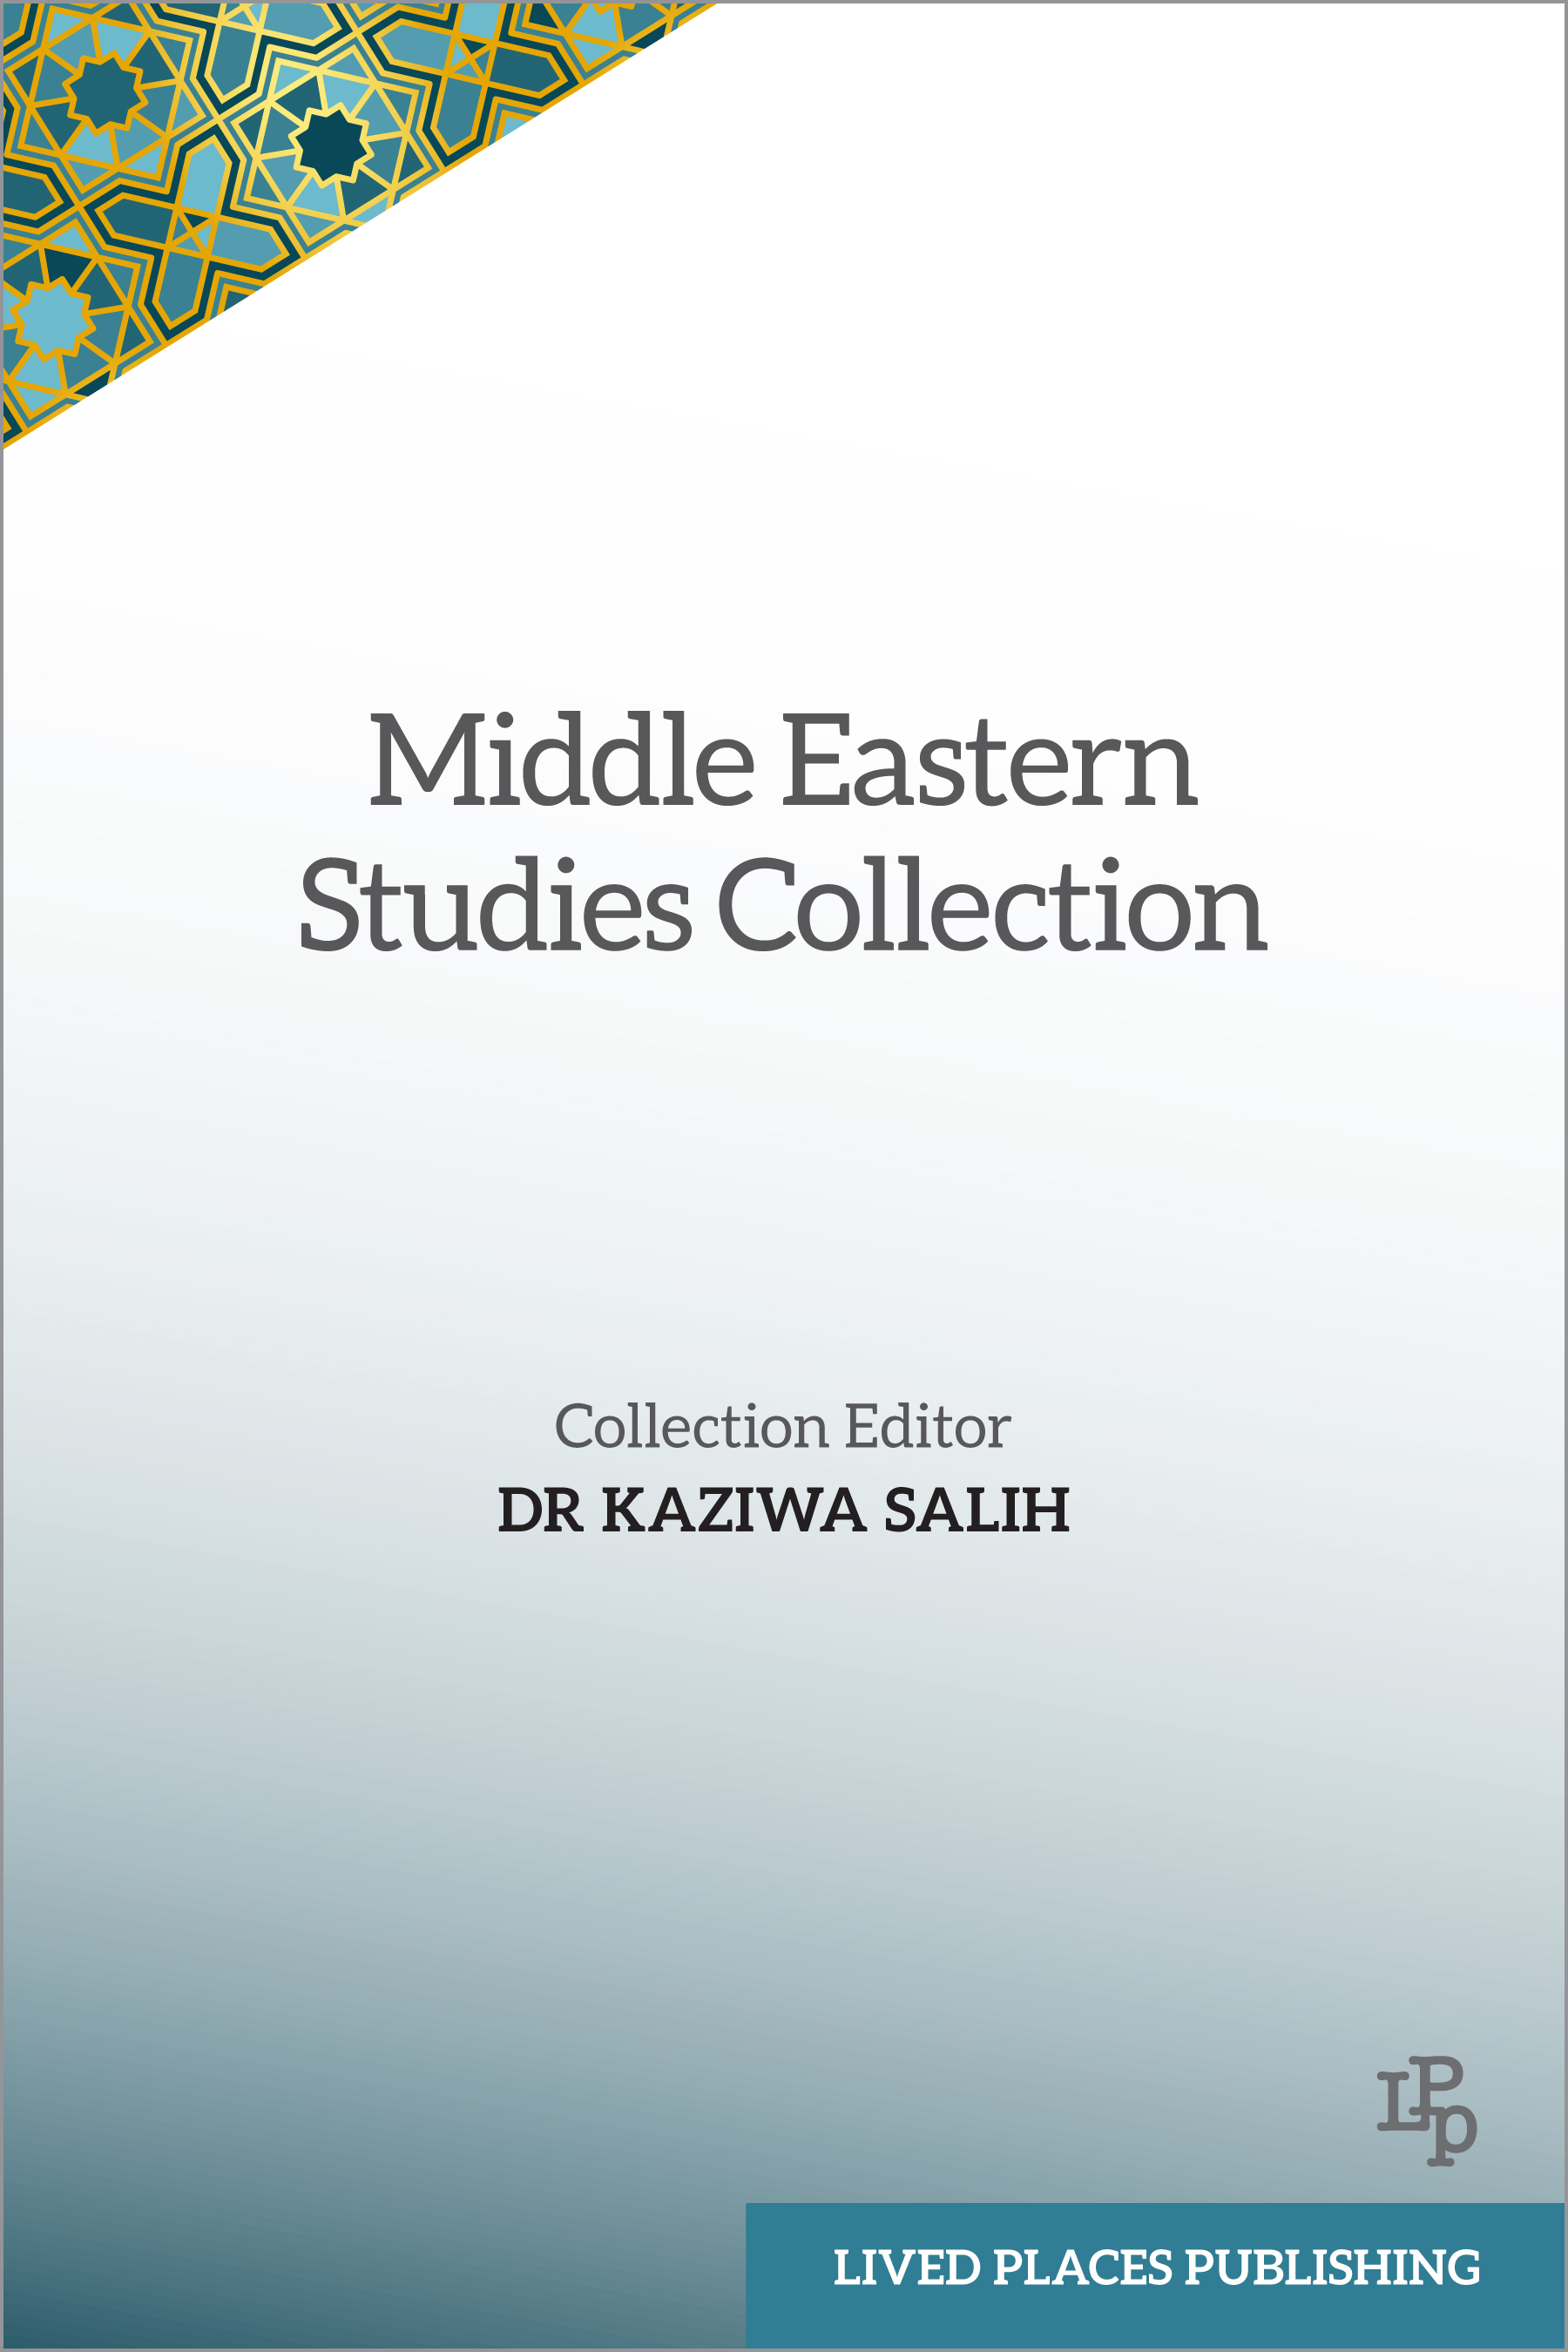 Middle Eastern Studies collection book cover.